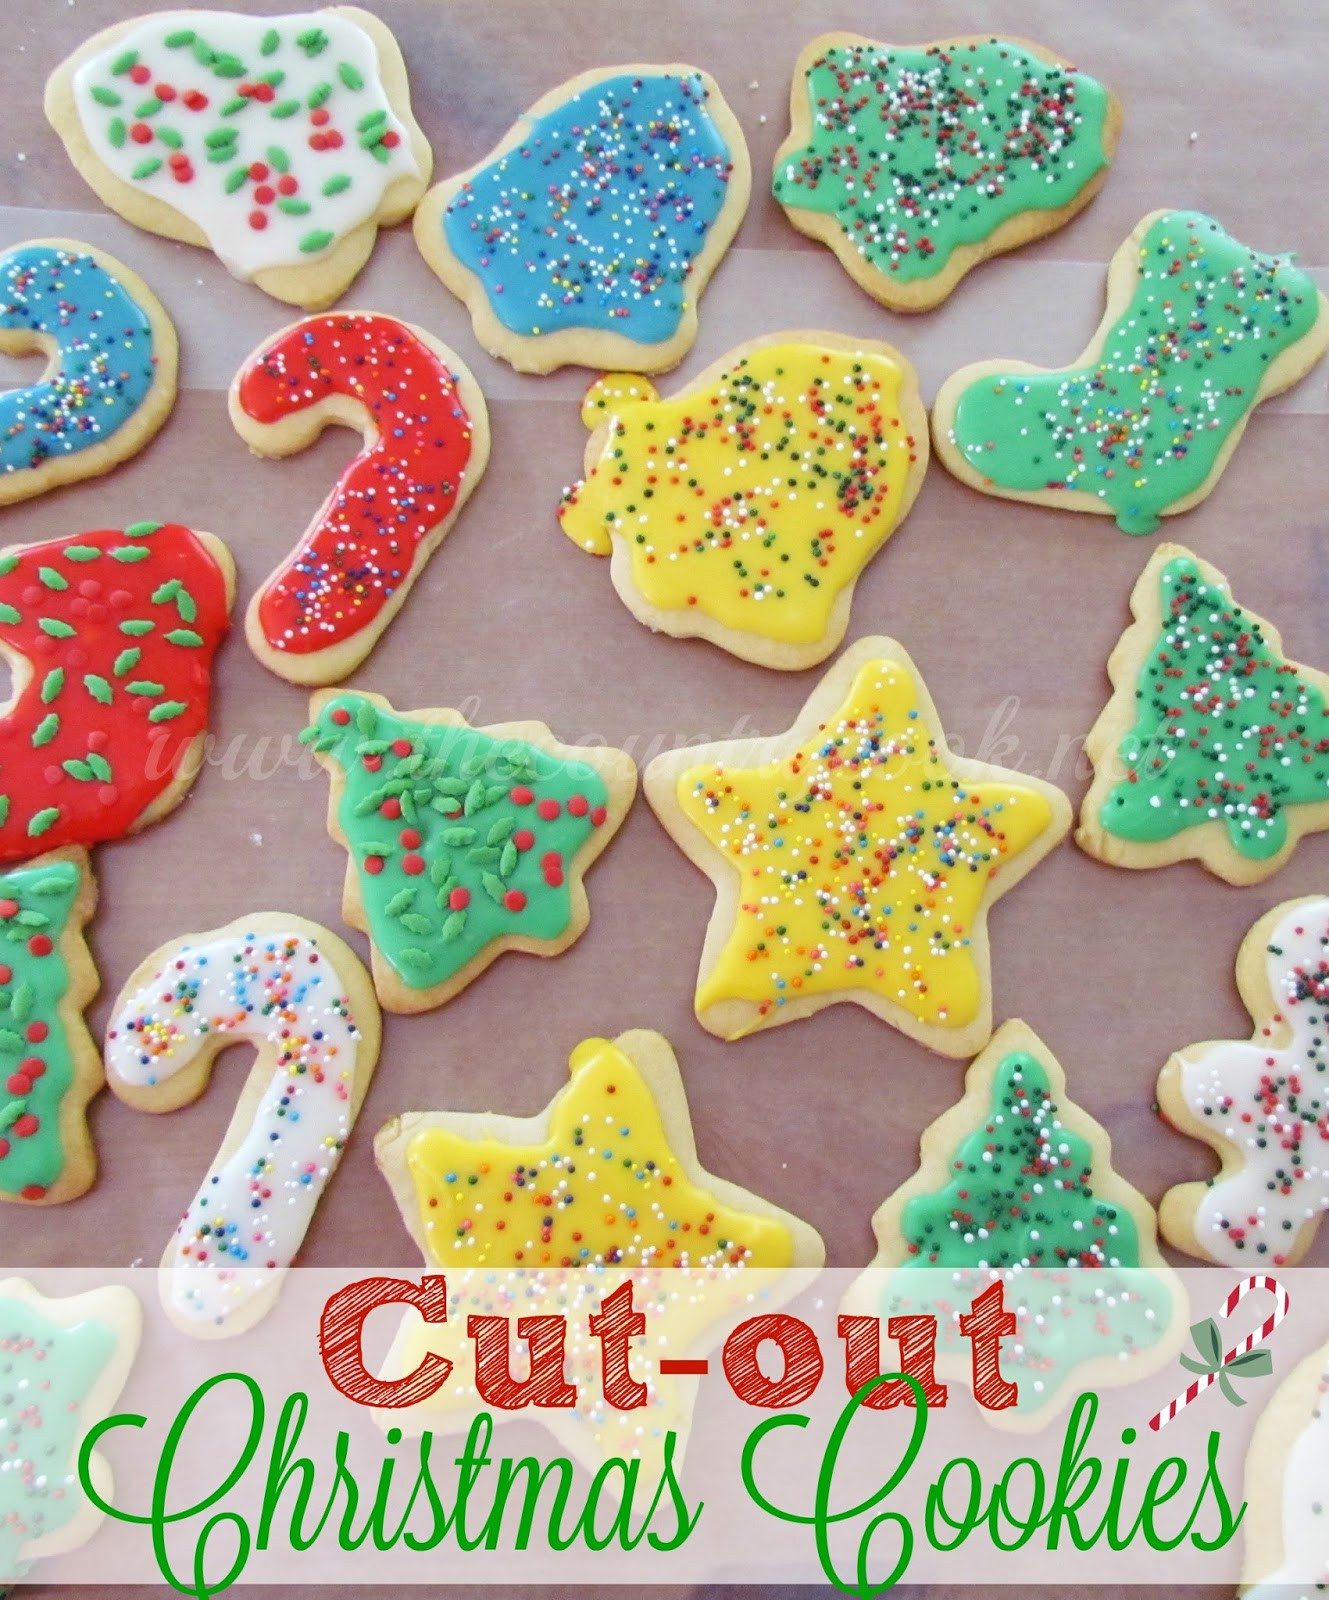 Christmas Cookies Sugar Cookies
 Cut Out Sugar Cookies The Country Cook